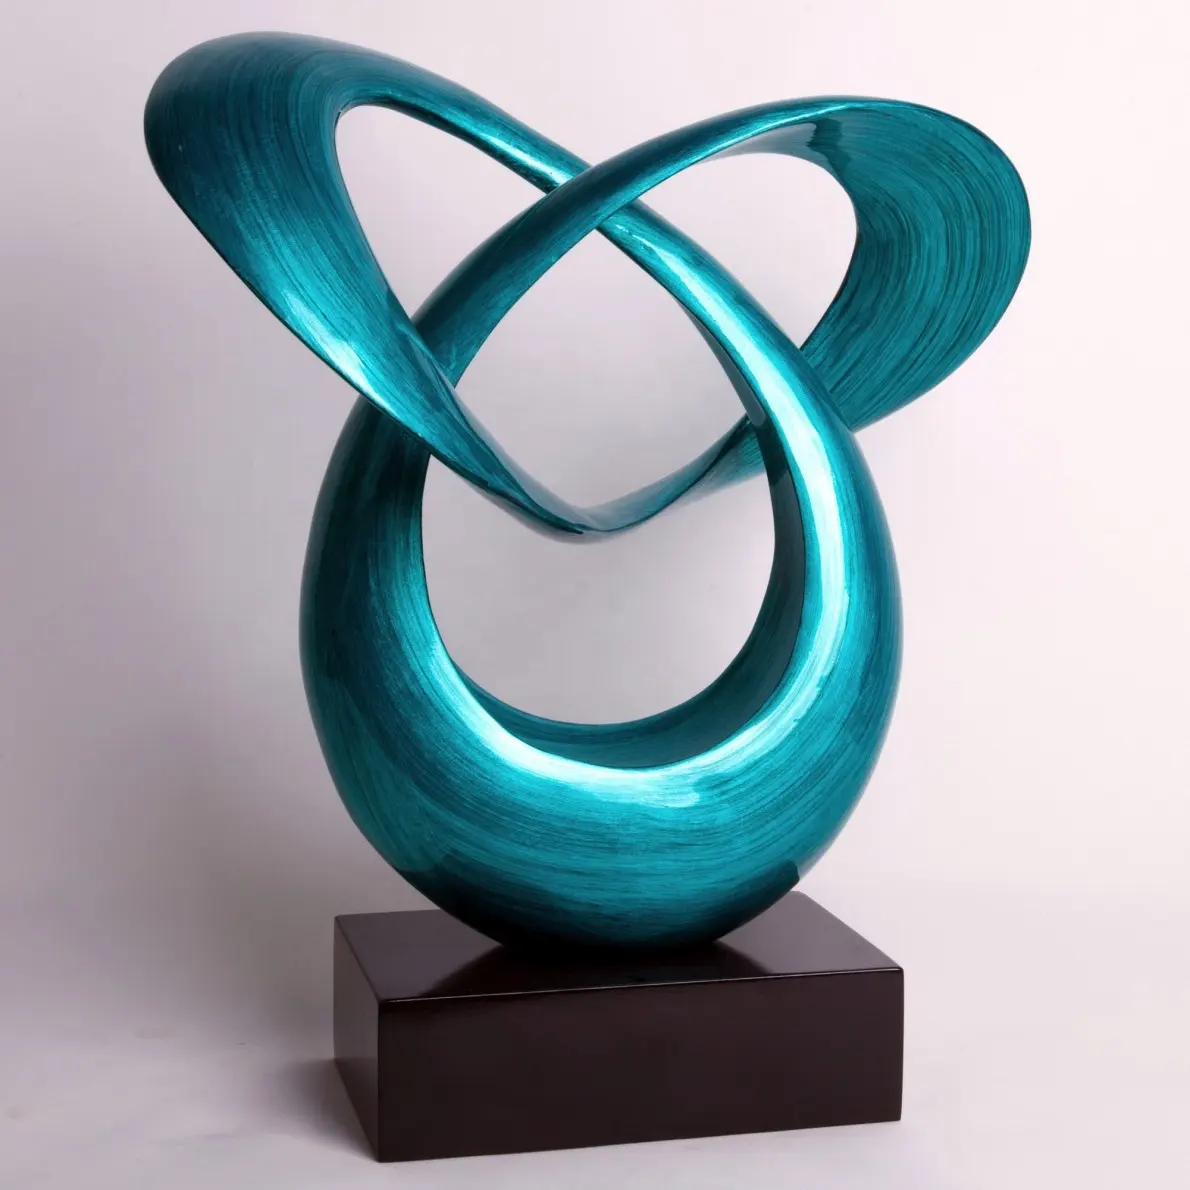 High quality best selling modern Lac Viet Arts Evolving Teal Sculpture 2015 from Vietnam